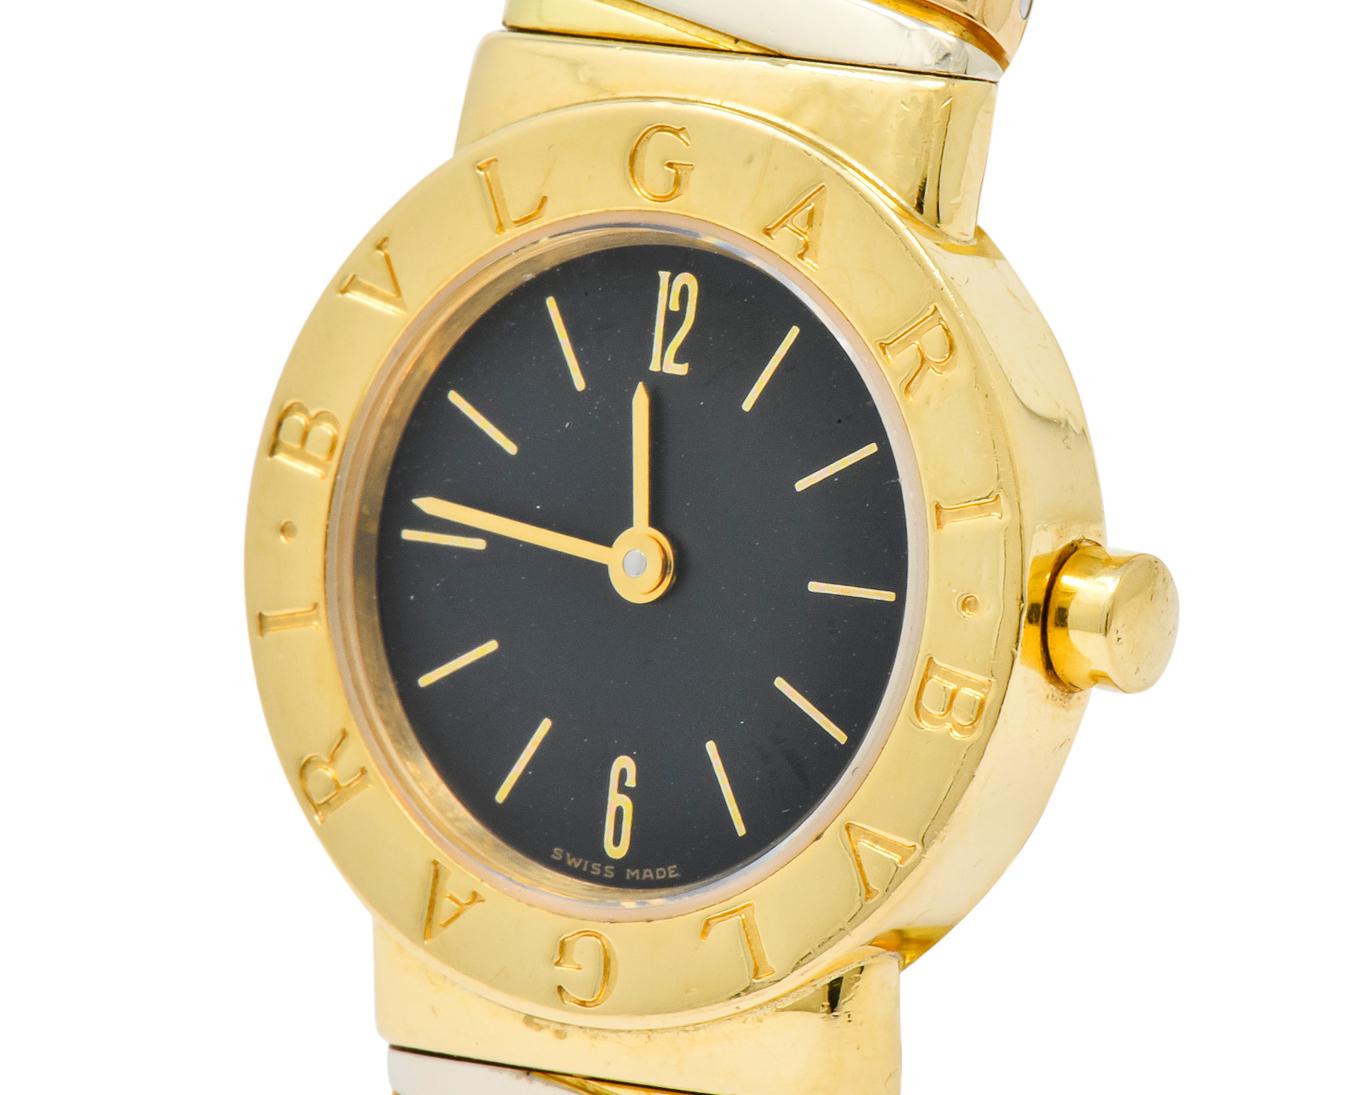 Featuring an 18 karat tri-color gold tobogas link cuff band

Black dial with sapphire crystal

Gold hour makers with double Bvlgari surround

Black dial with yellow gold indices & arrow hands

Quartz Movement 

Polished 18 karat gold

Fully signed